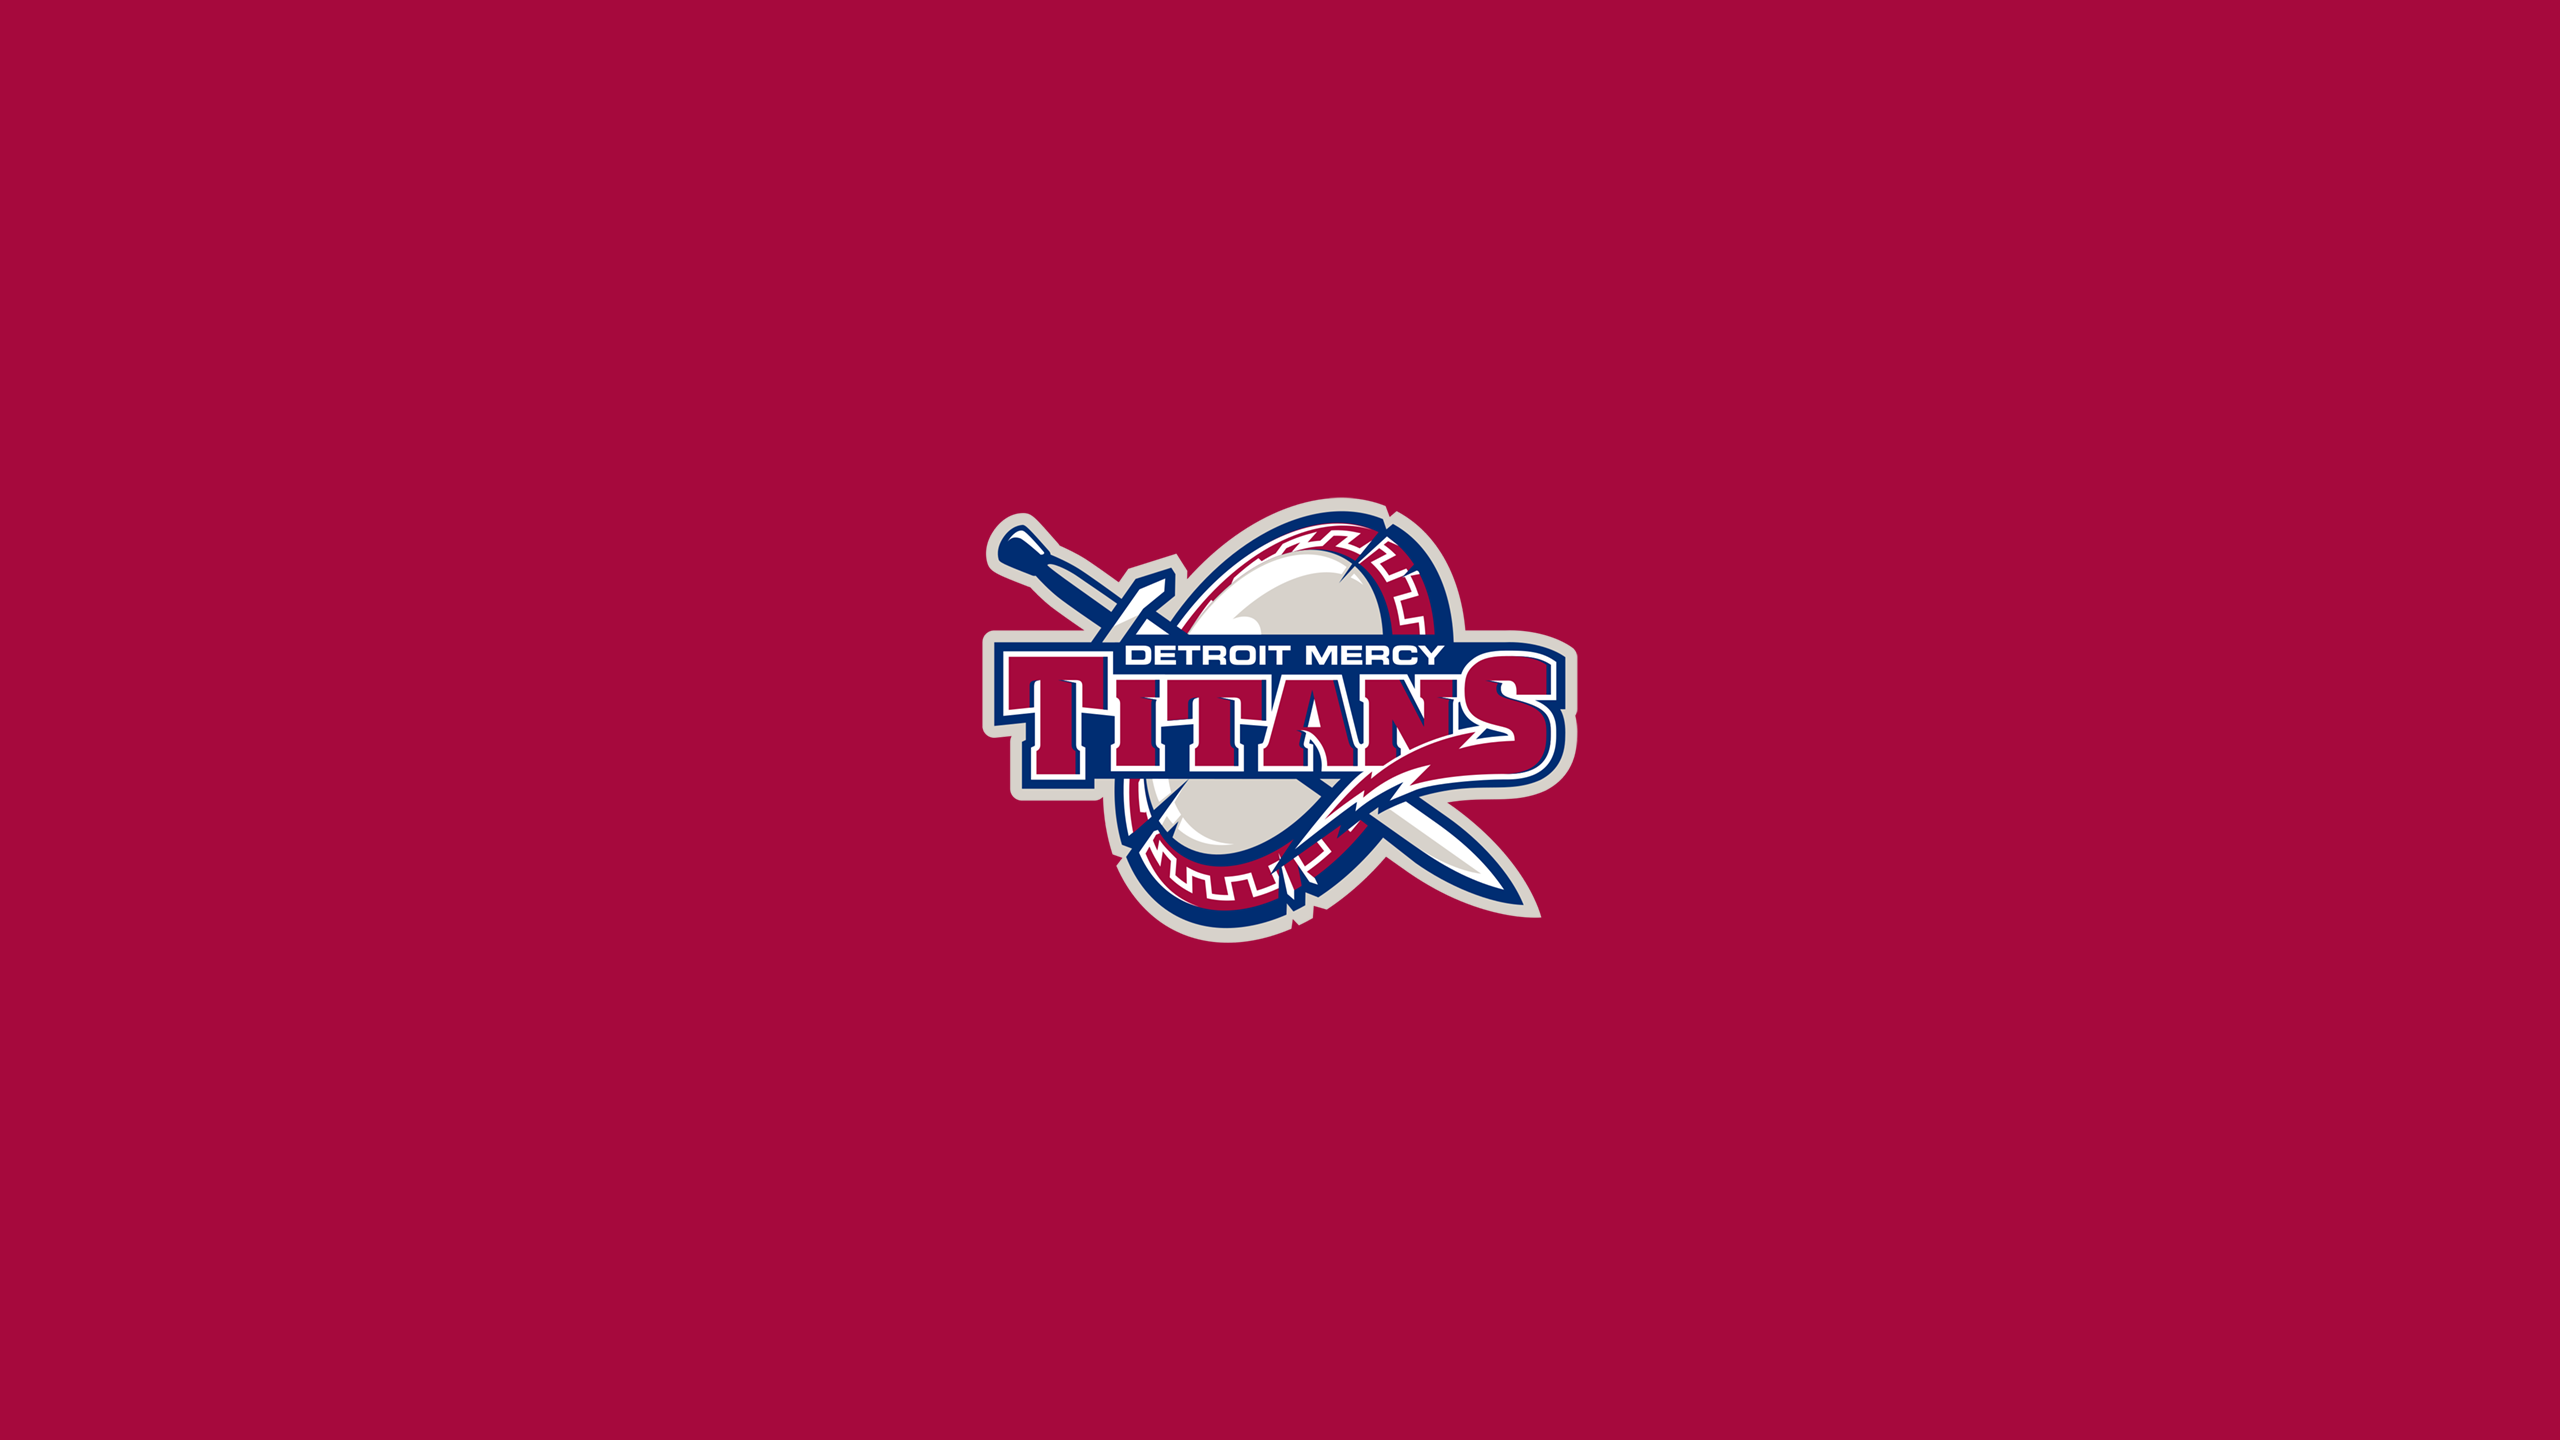 Detroit Mercy Titans Basketball - NCAAB - Square Bettor